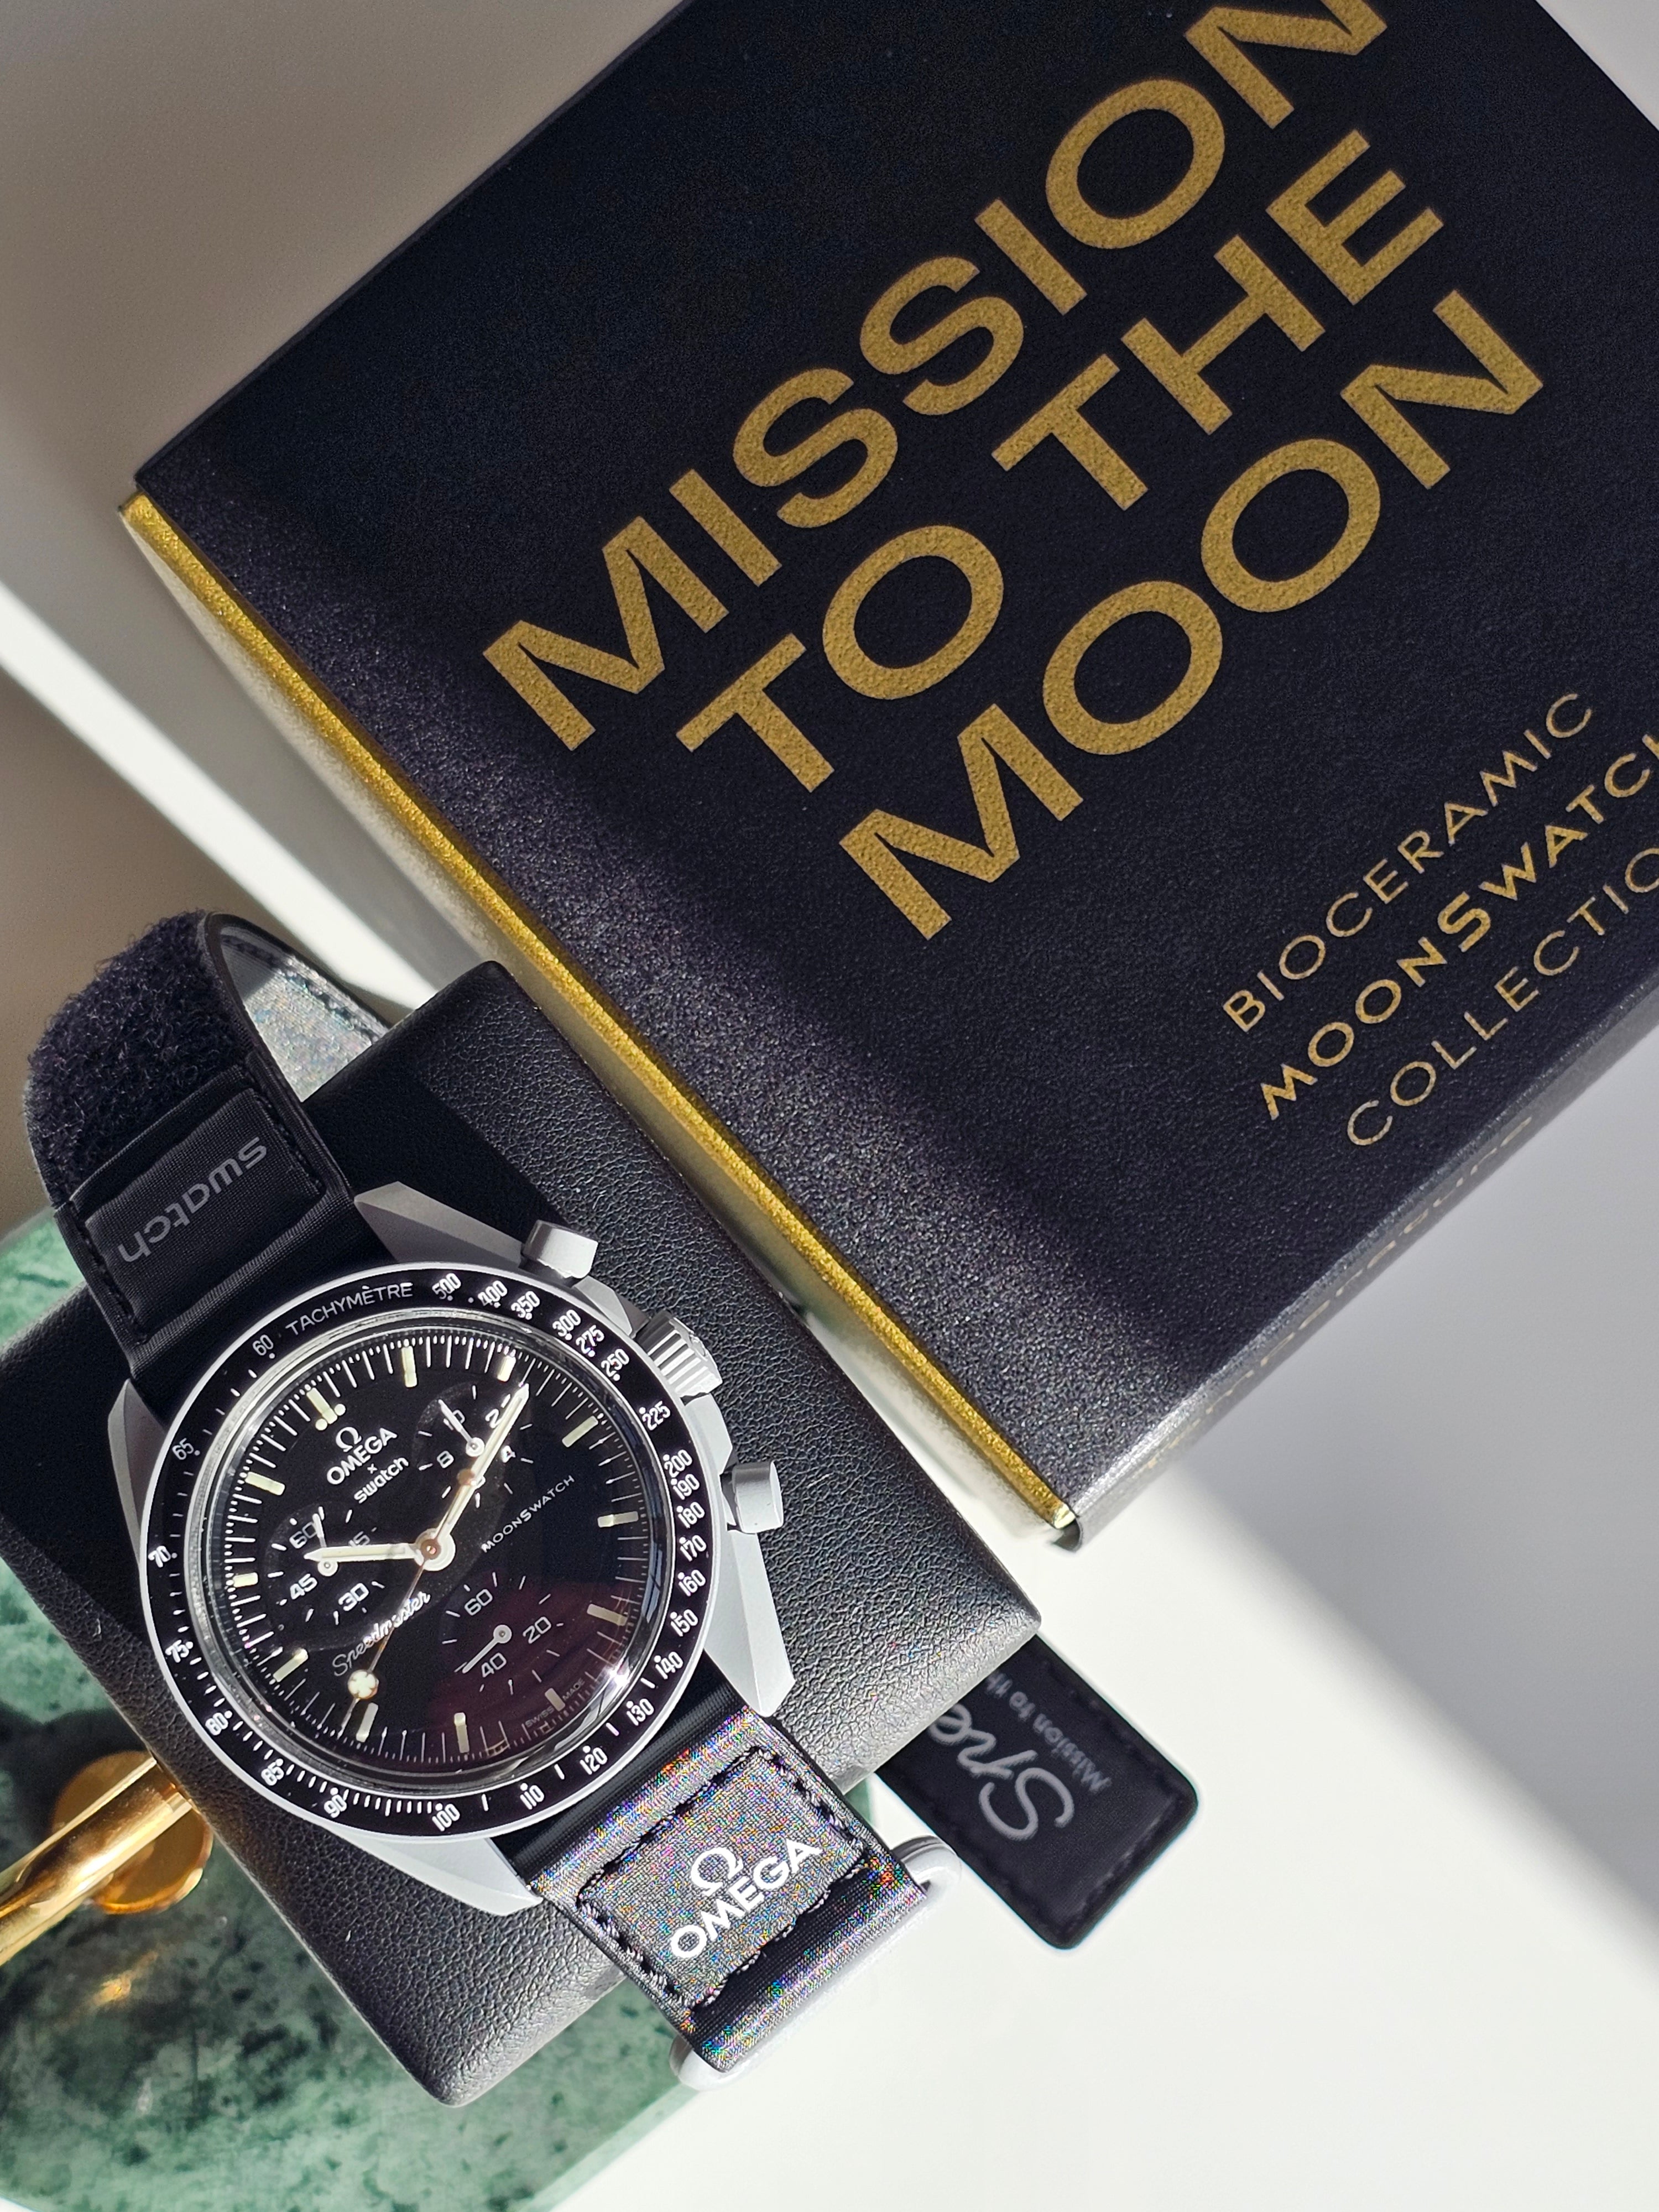 Swatch Moonswatch - Moonshine: Lollipop Moon Edition – MGB WATCHES